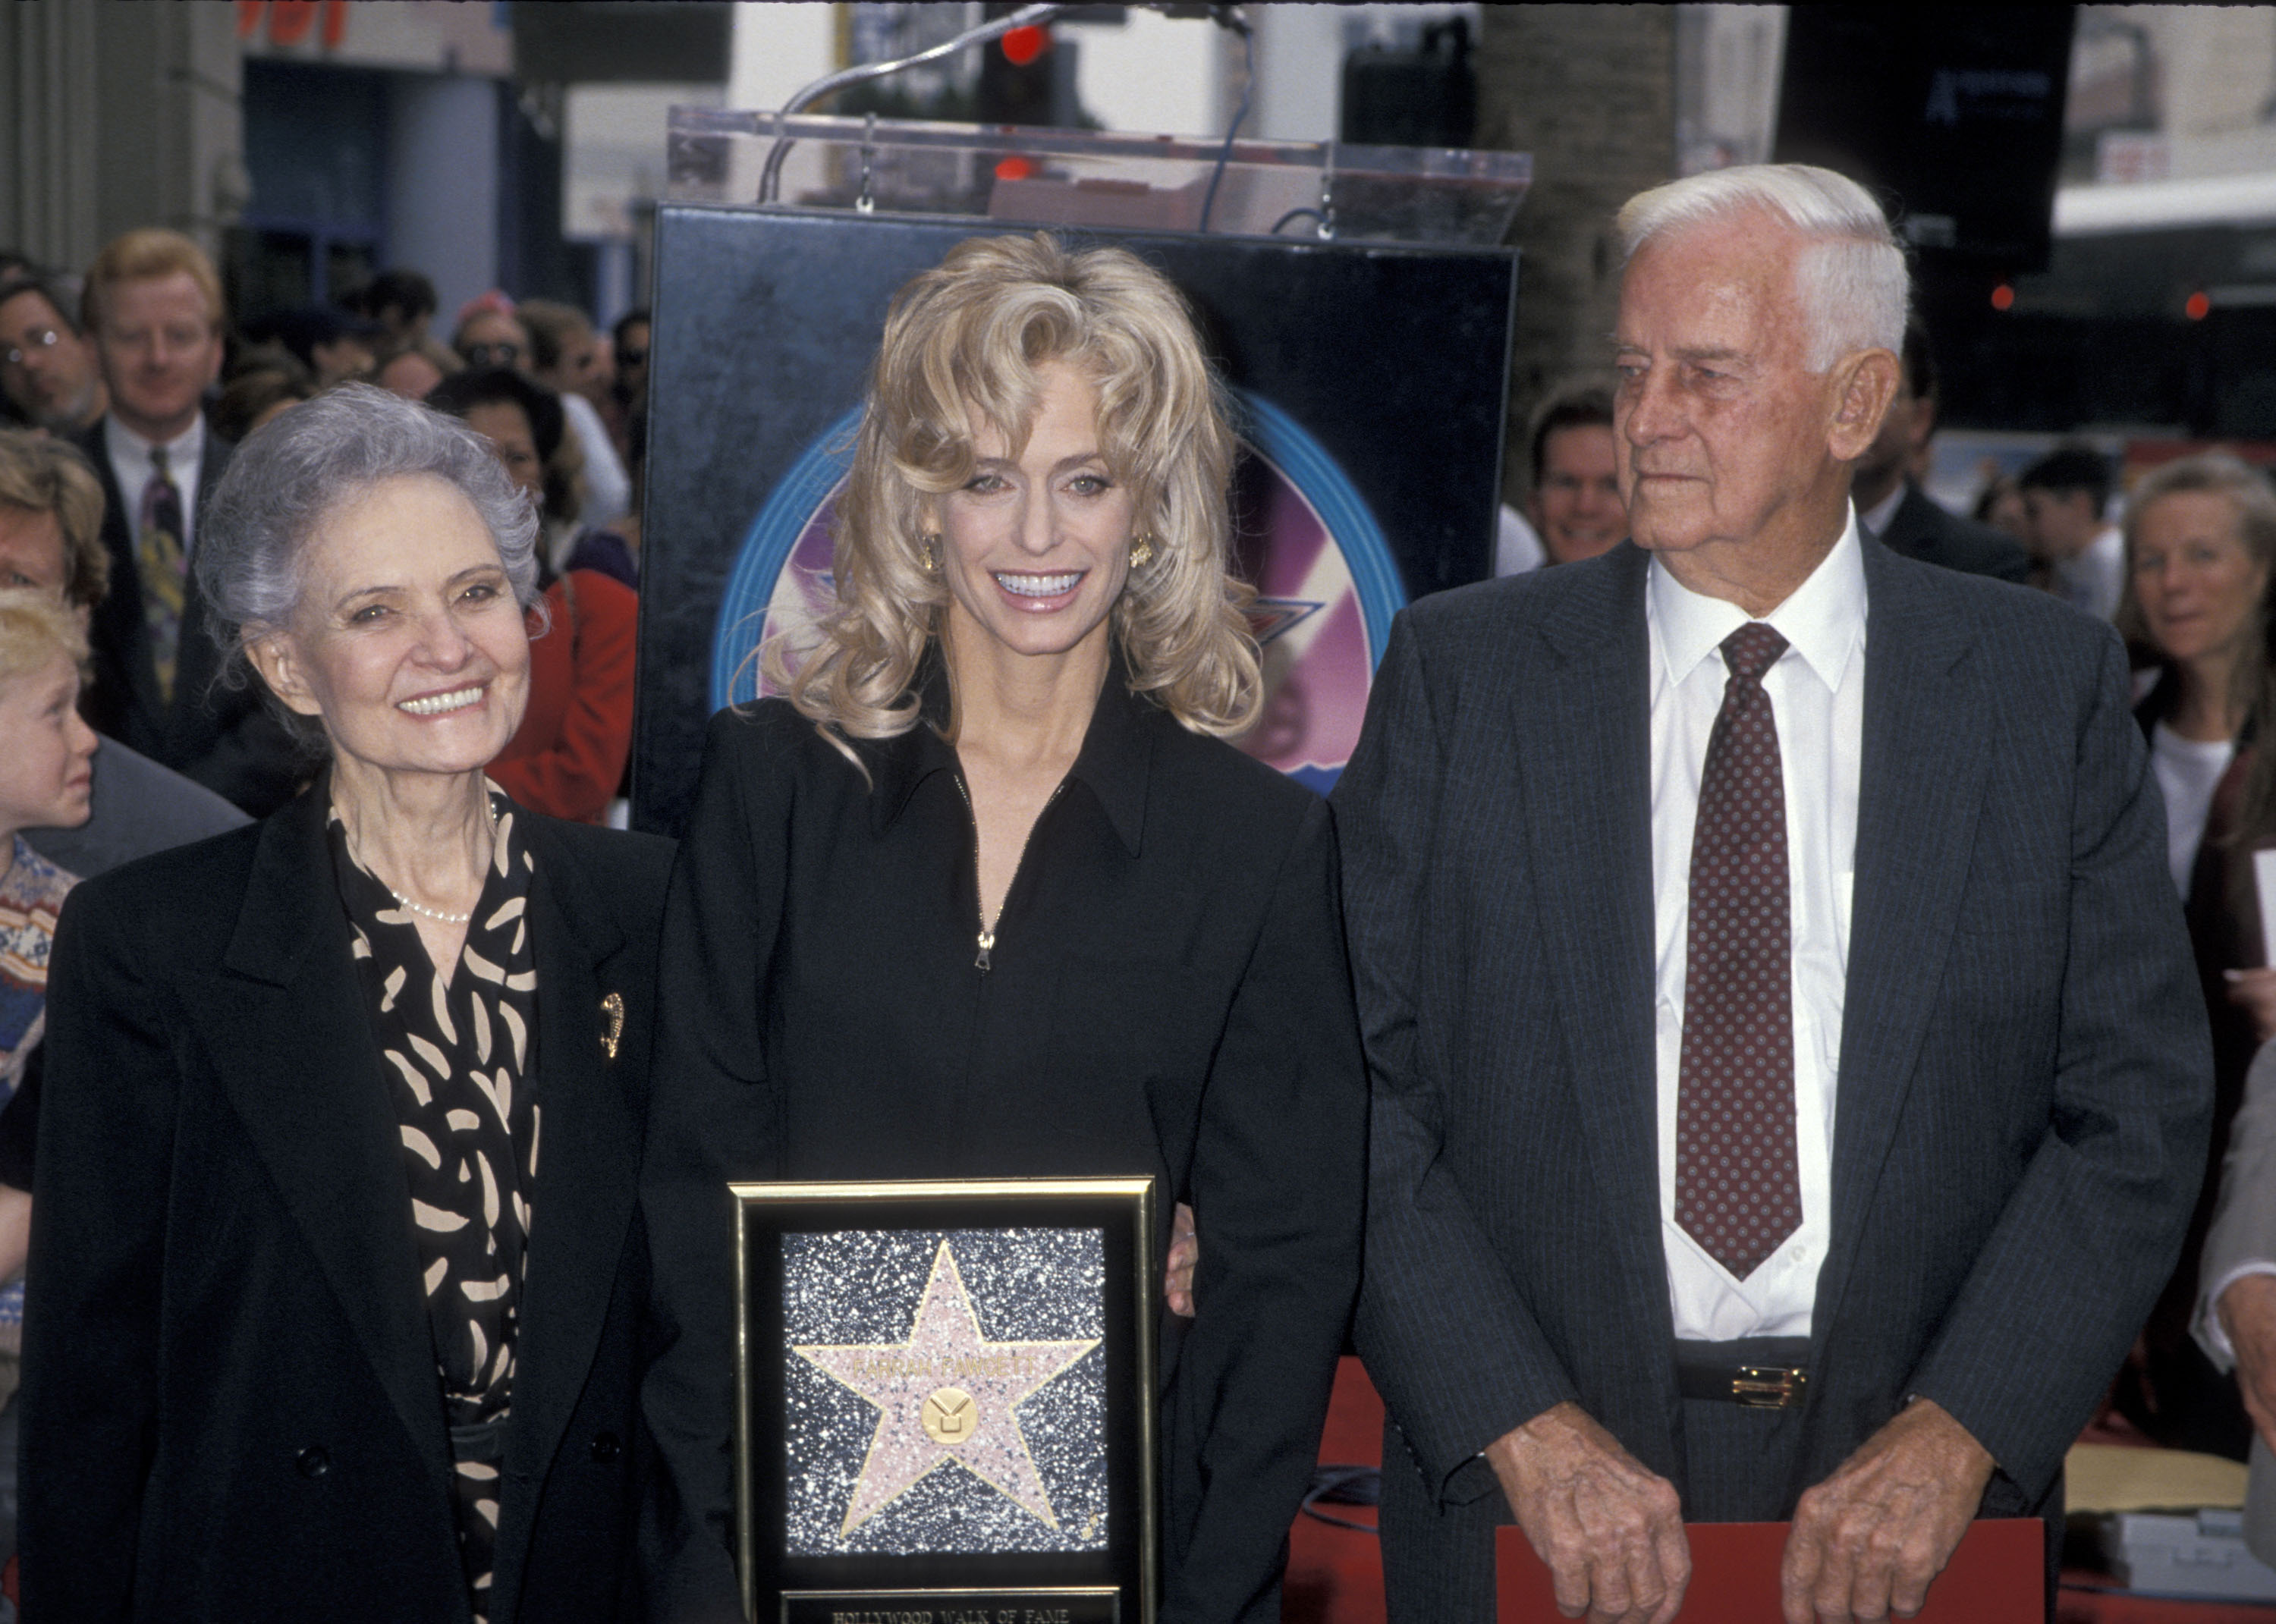 Farrah Fawcett with her parents Pauline and James Fawcett as she's honored with a Star on the Hollywood Walk of Fame on February 23, 1995 | Source: Getty Images